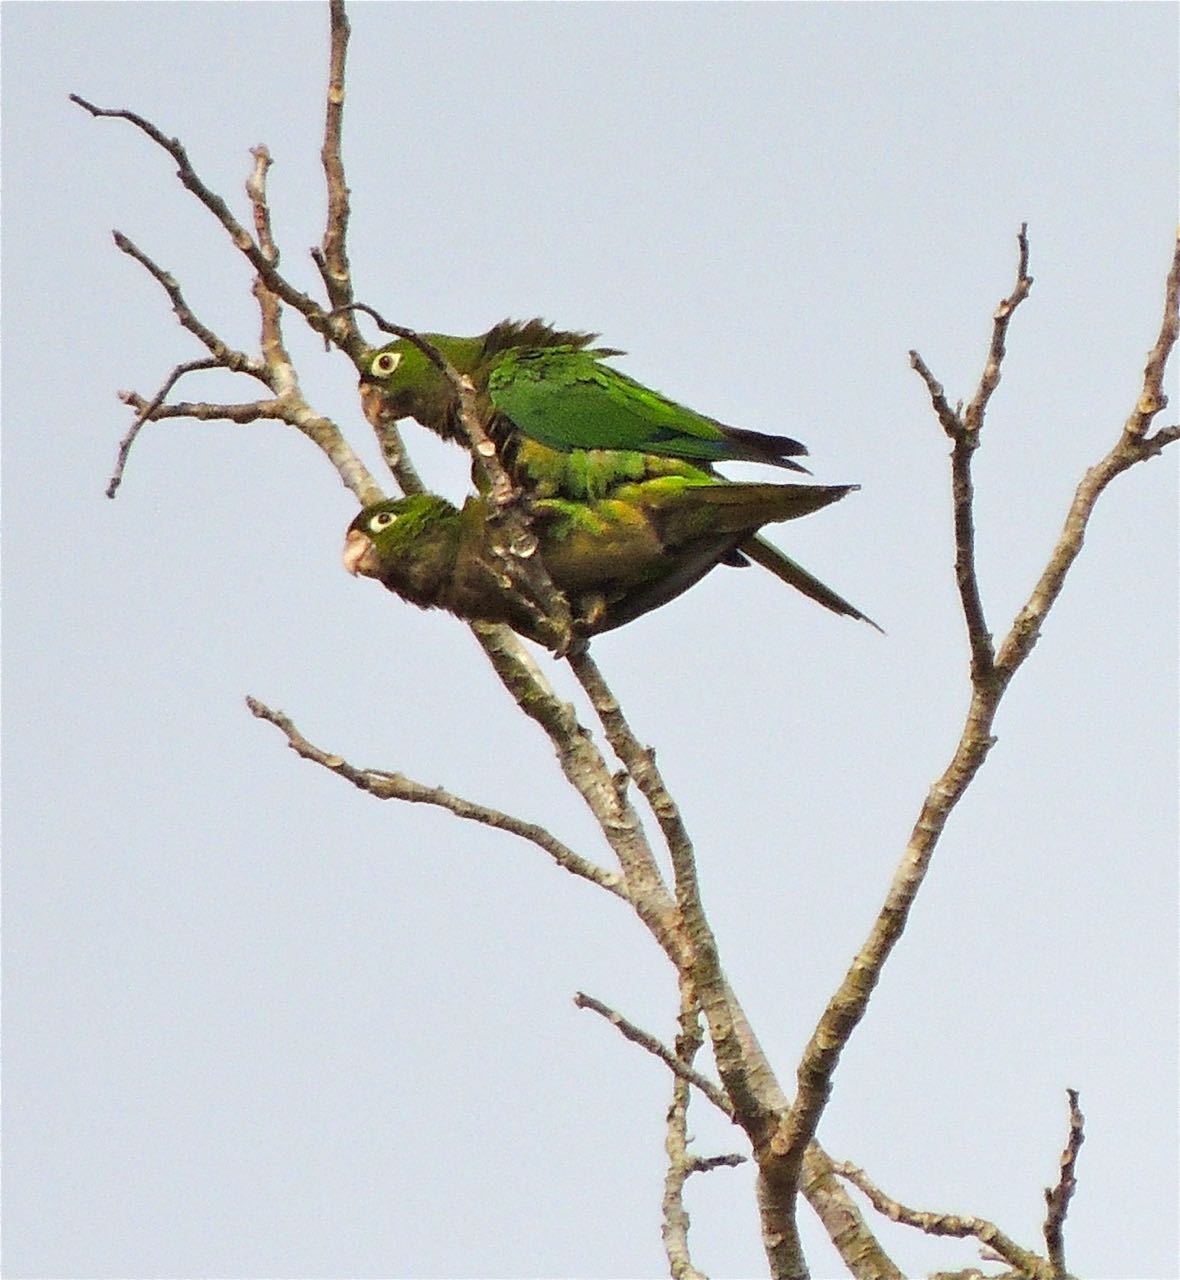 Olive-throated Parakeets